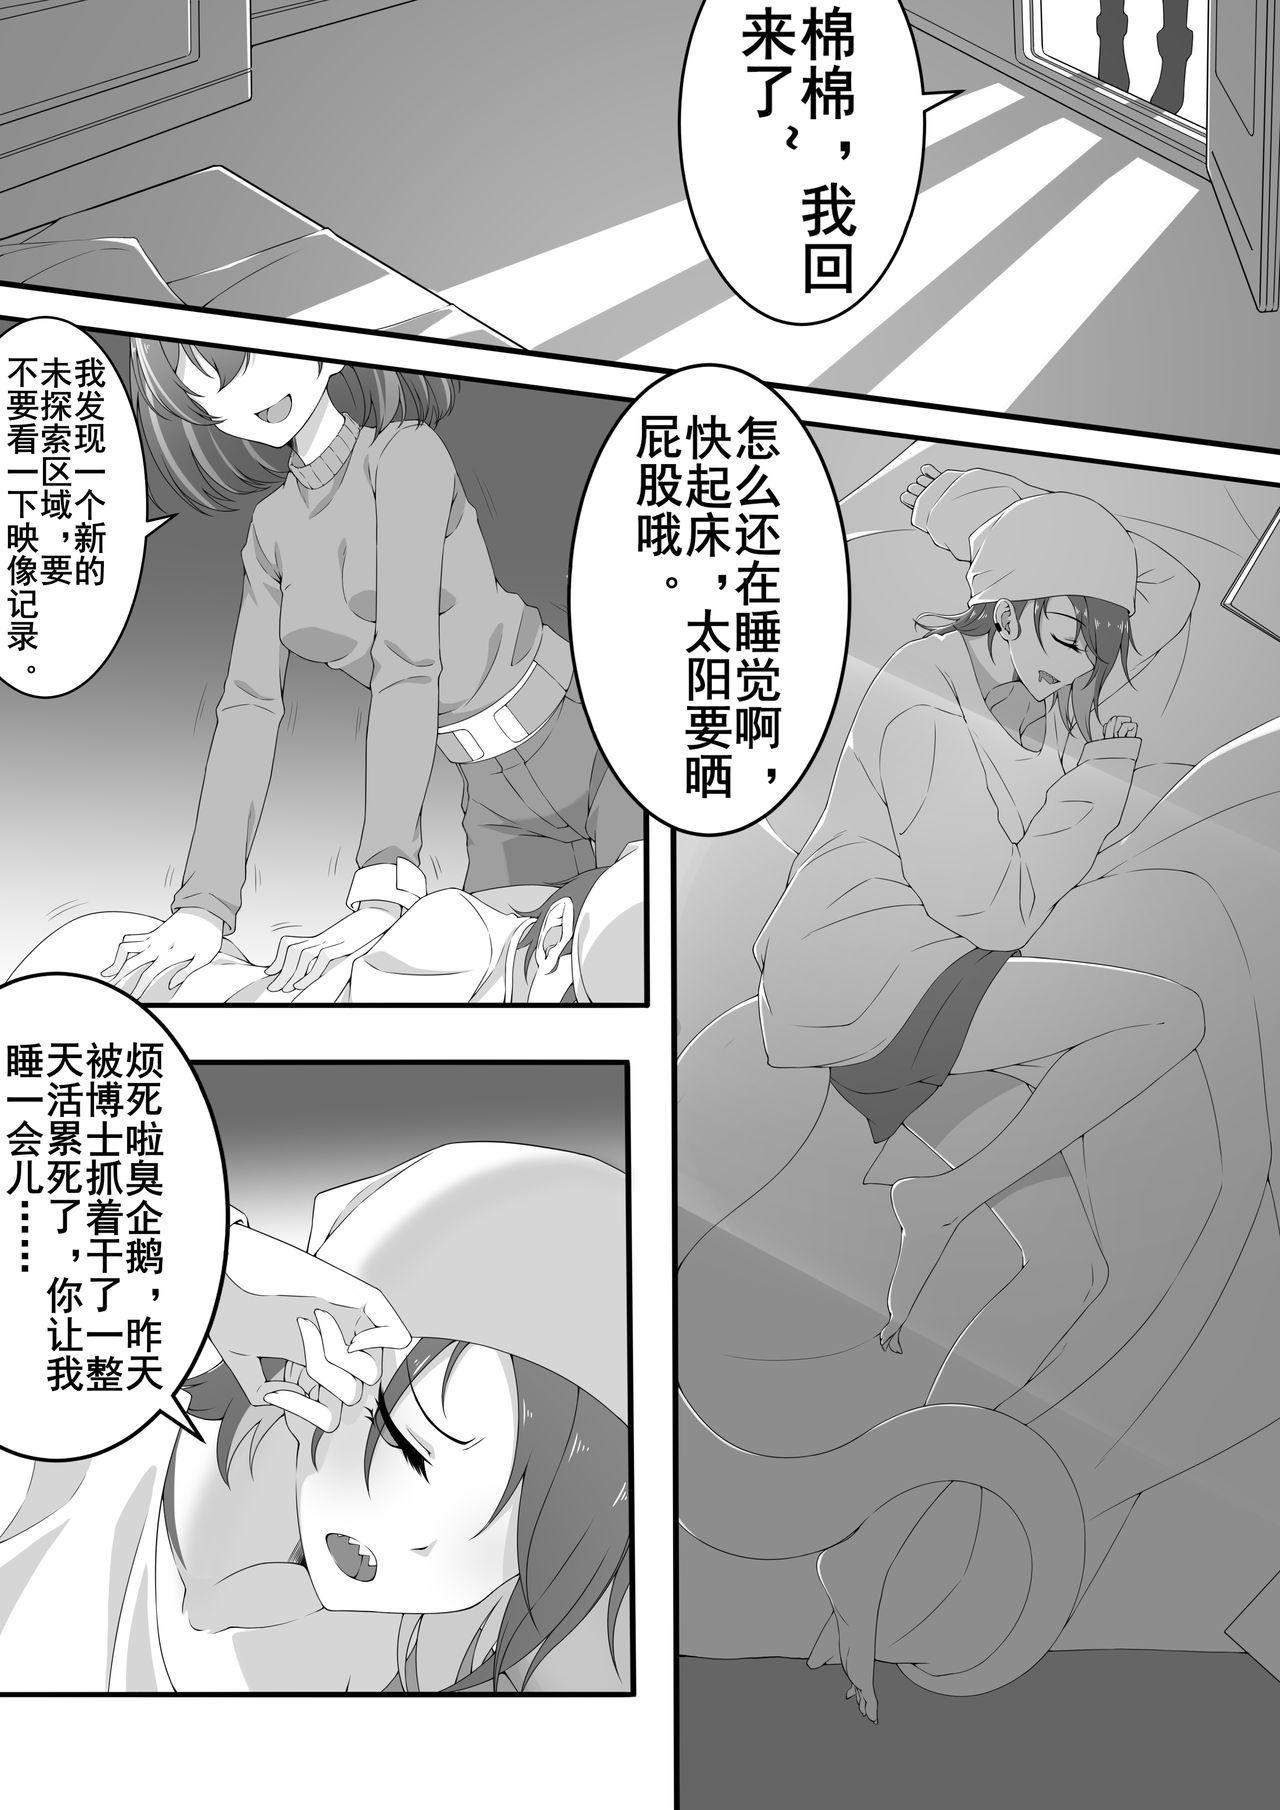 Youth Porn Return of Adventure - Arknights Ball Licking - Page 2